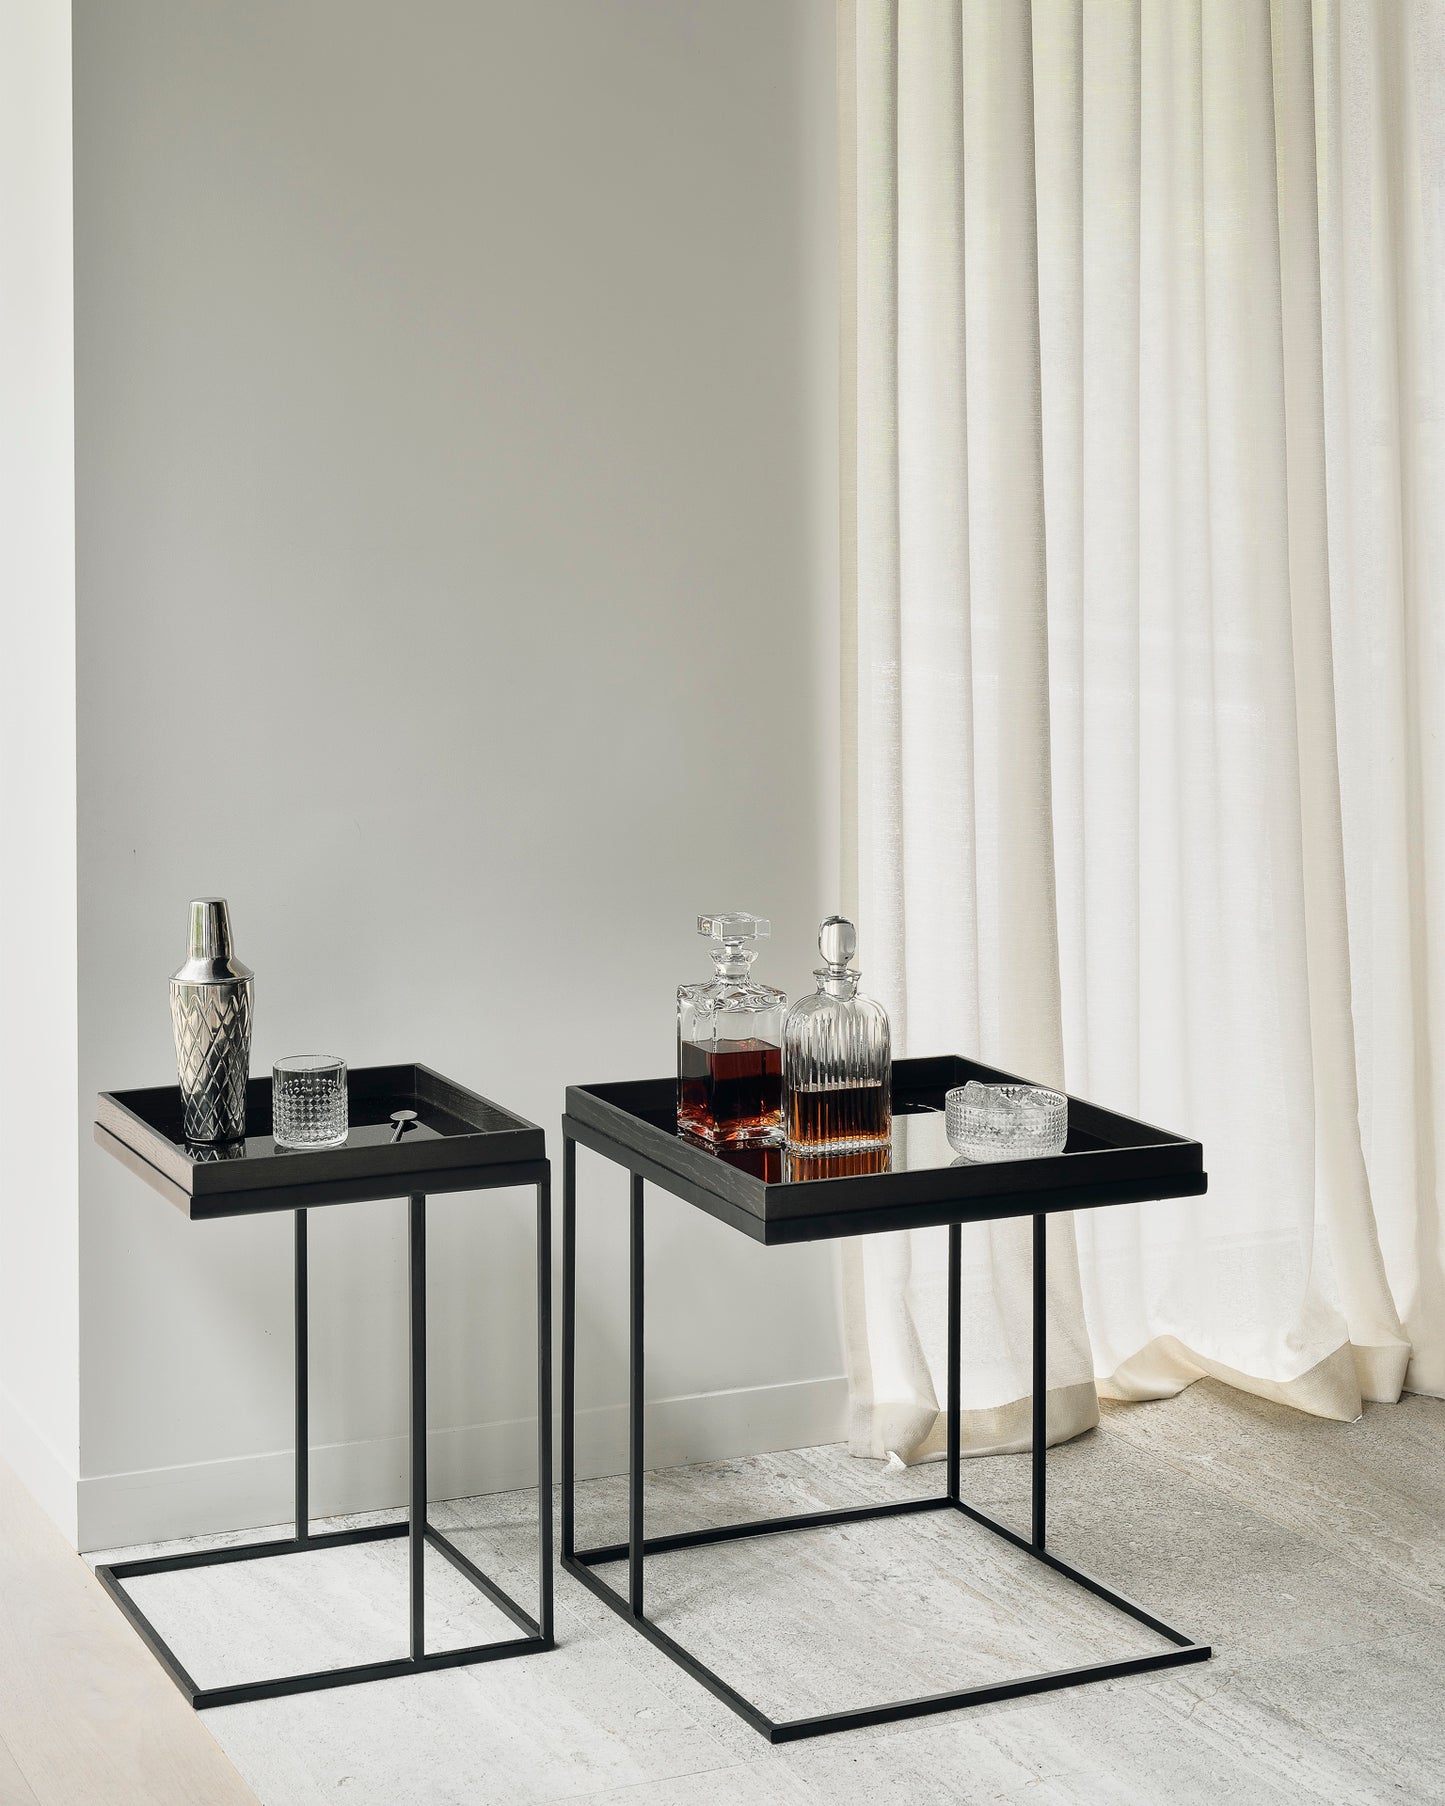 Square tray side table (tray not included)